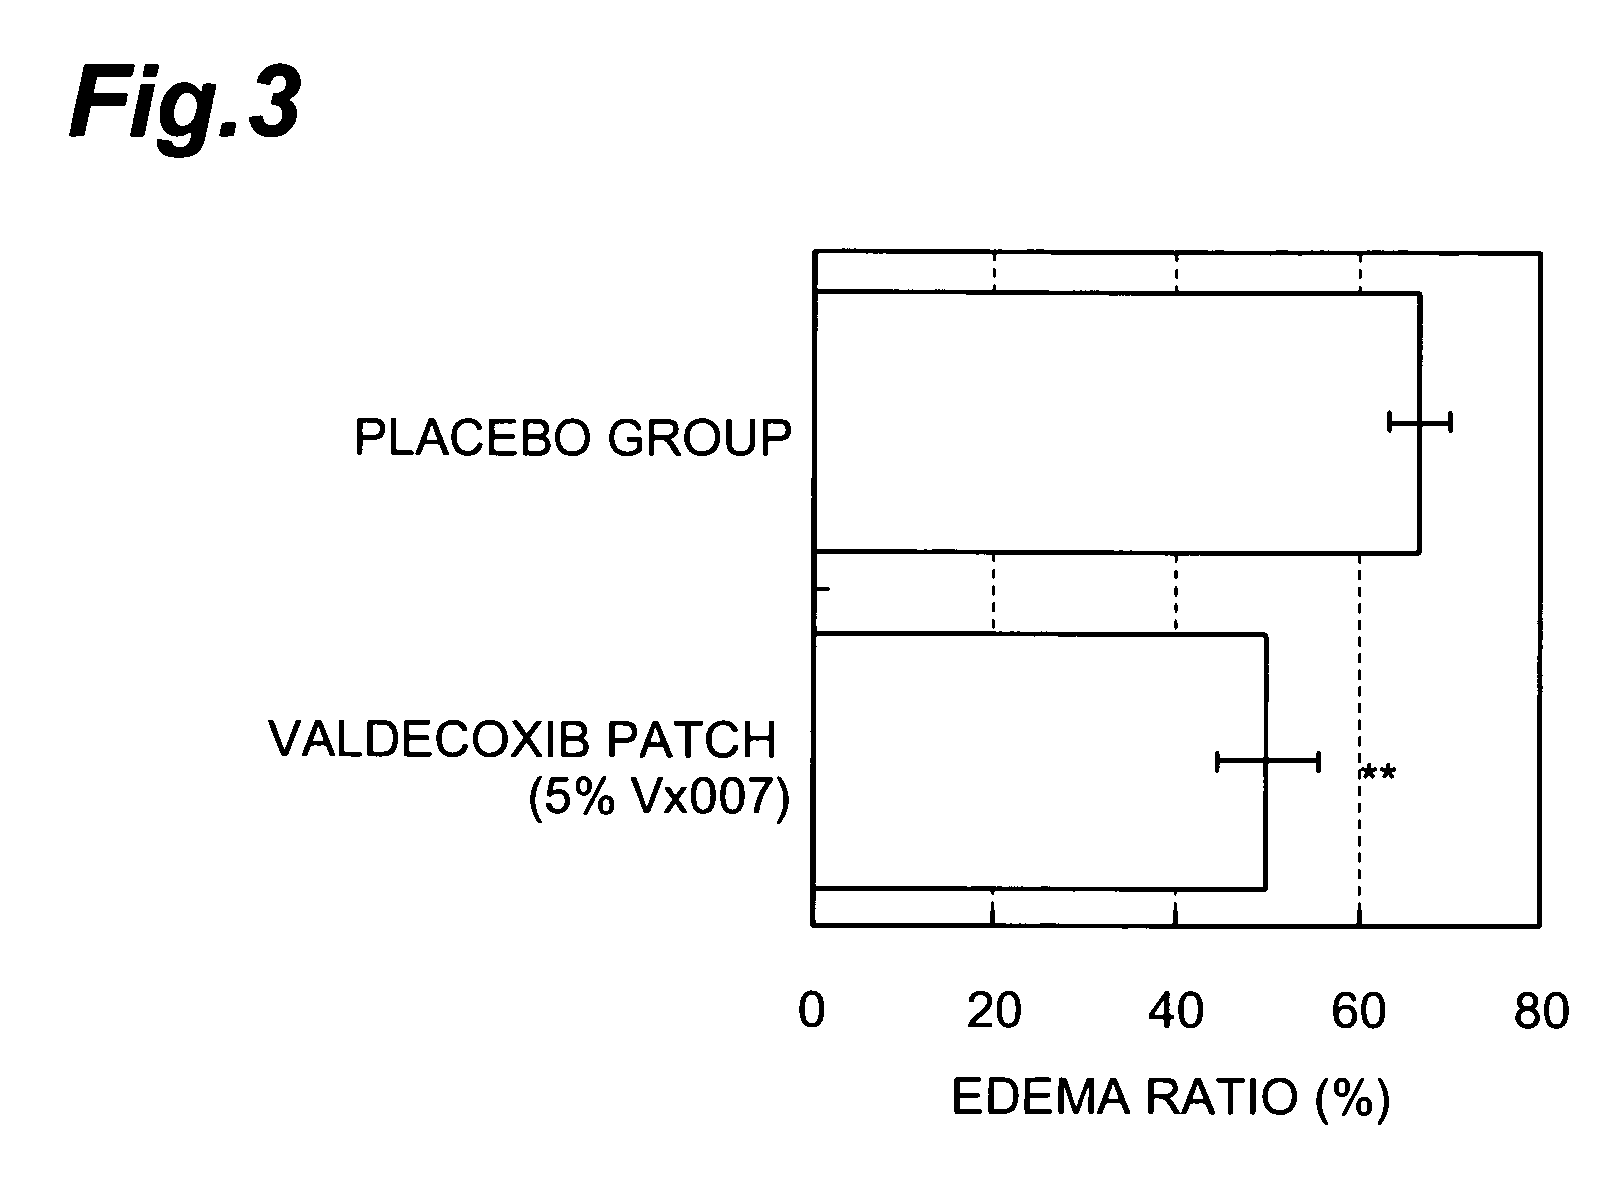 Patch for transdermal administration